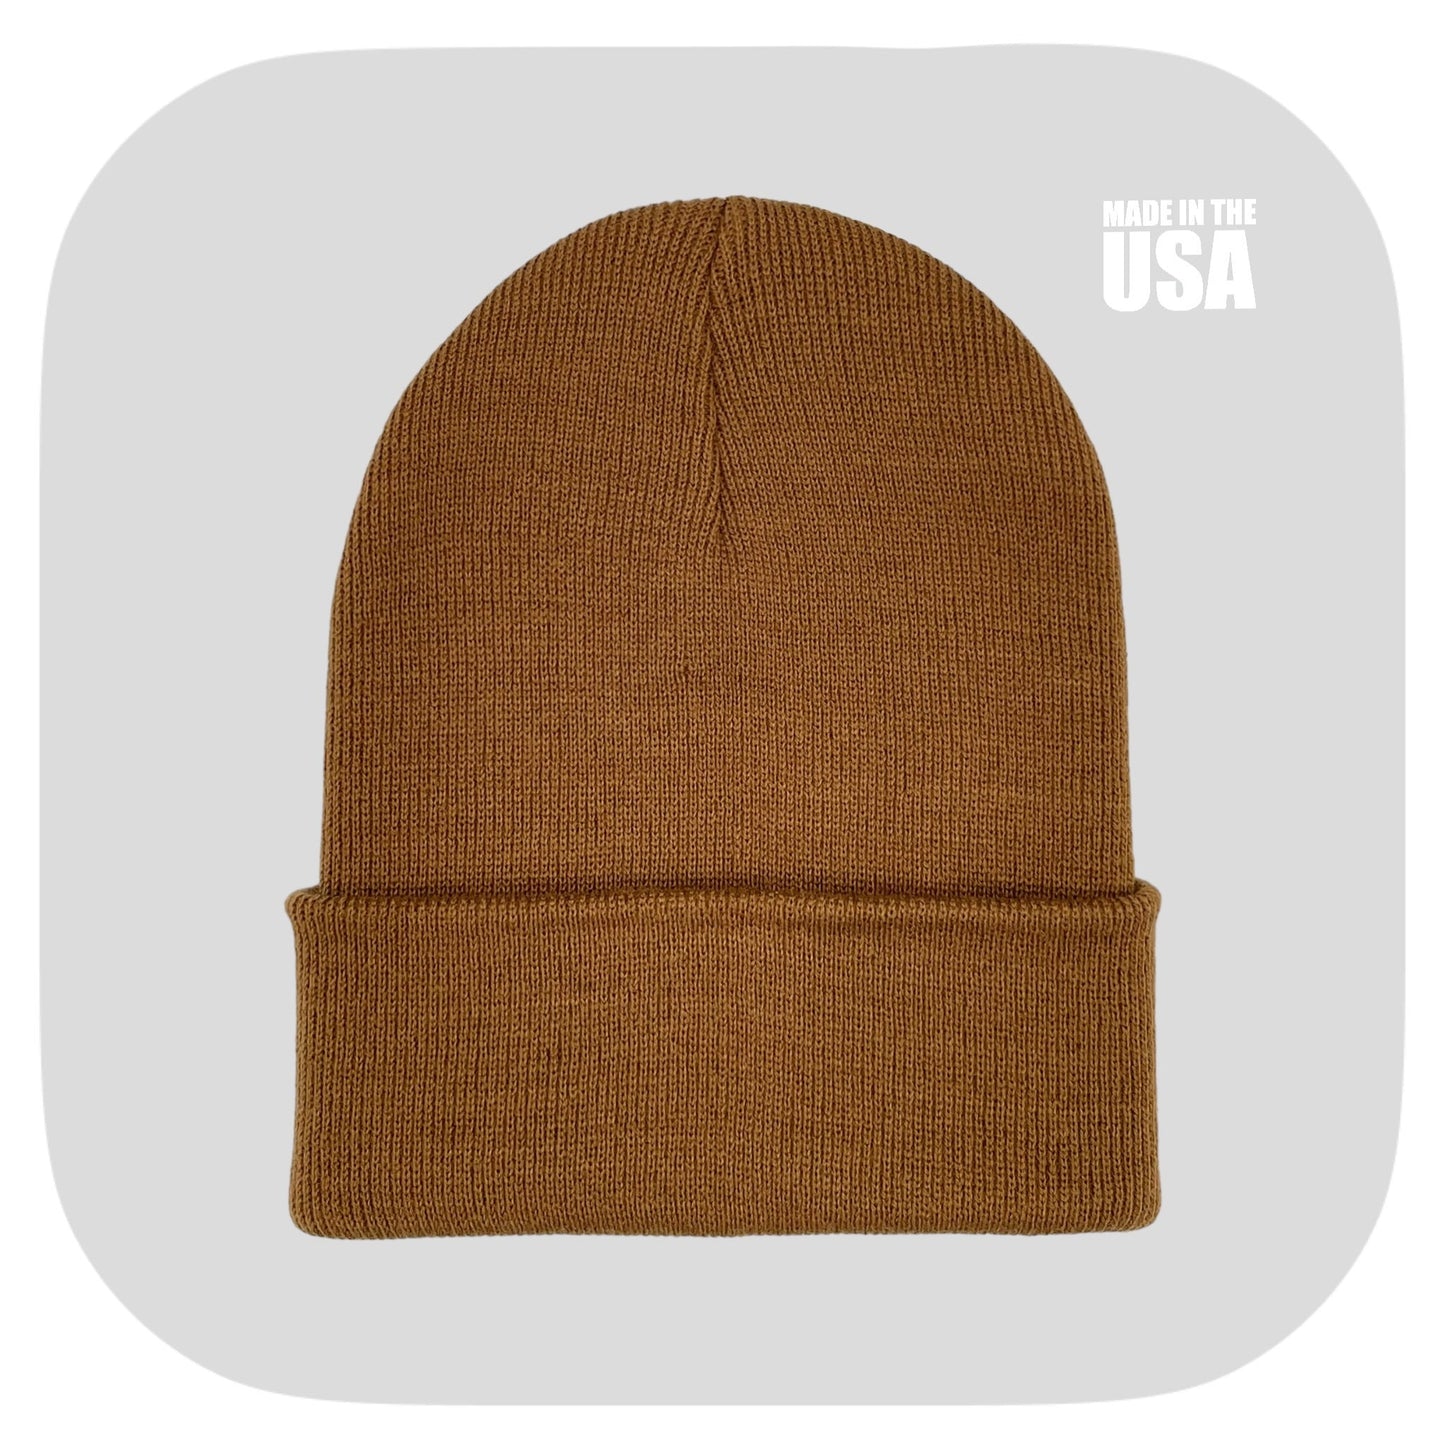 Blank Beanie Factory Cuffed Winter Hat, Wholesale price, Premium Quality, Beige, Made in U.S.A - The Beanie Factory